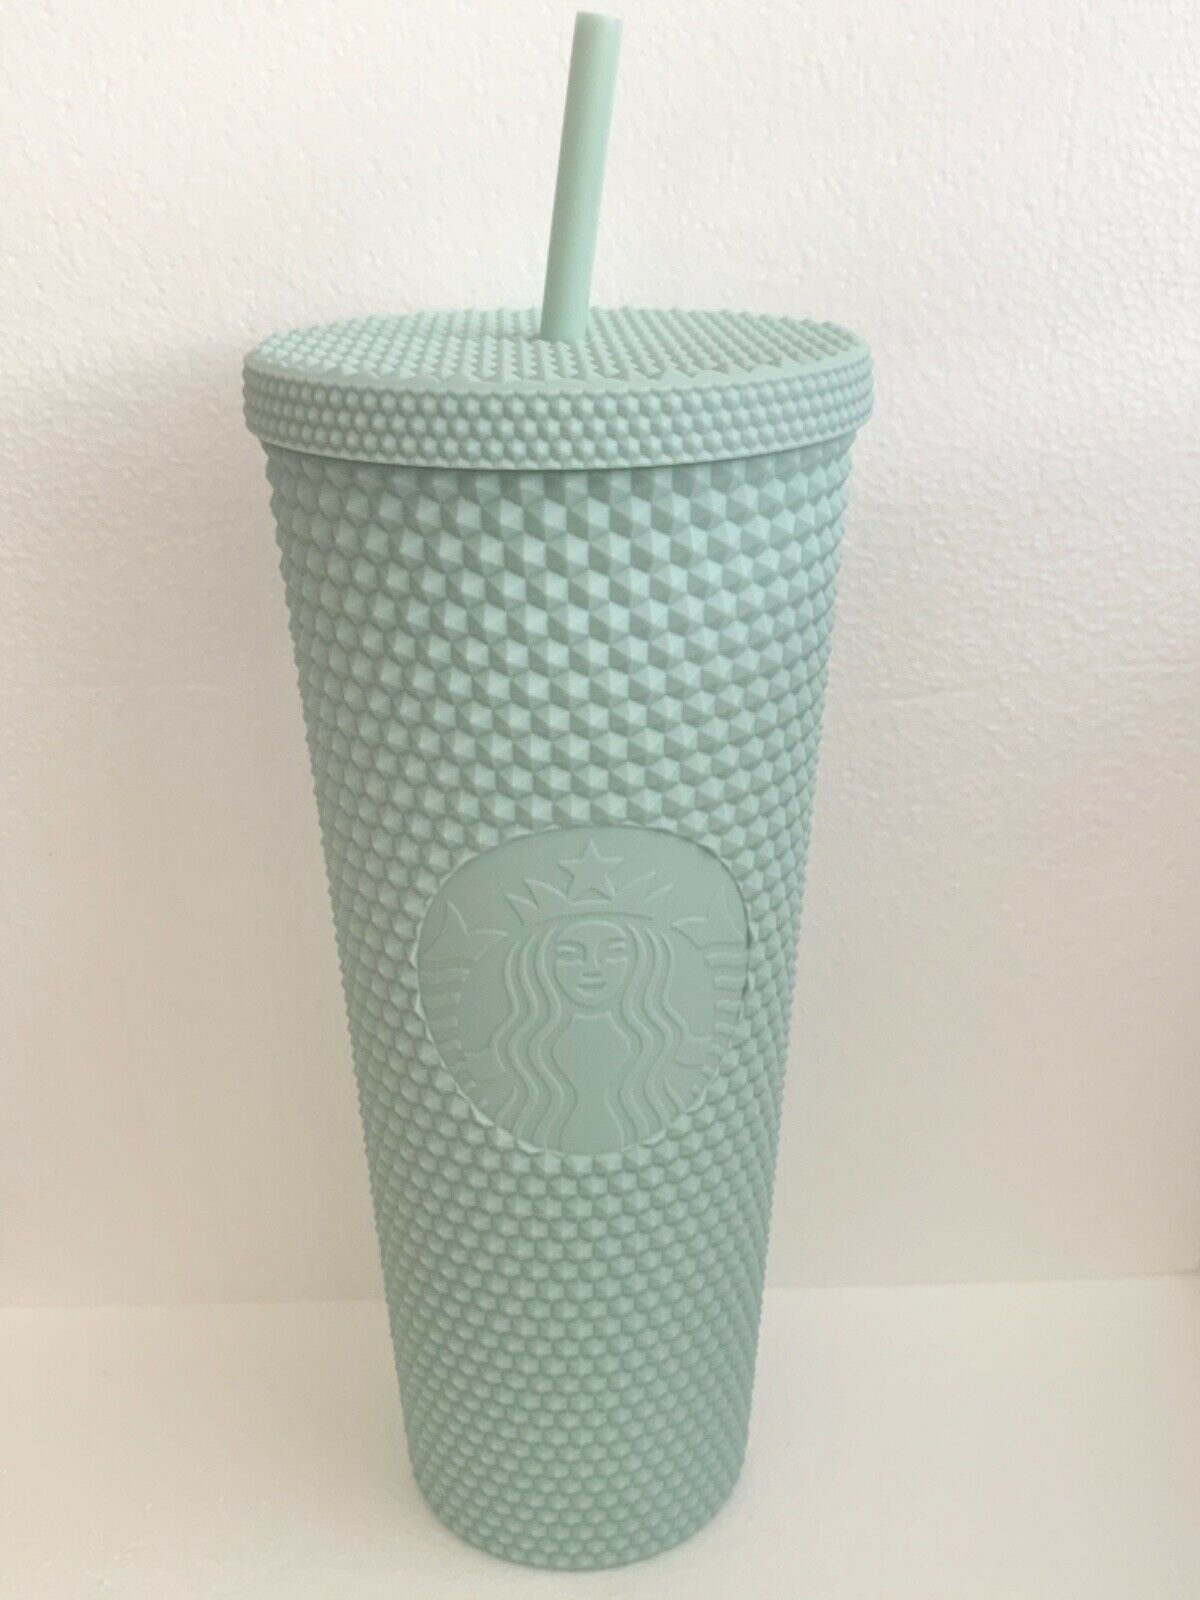 Starbucks Vacuum Insulated Tumbler Holiday 16 Oz Limited Edition